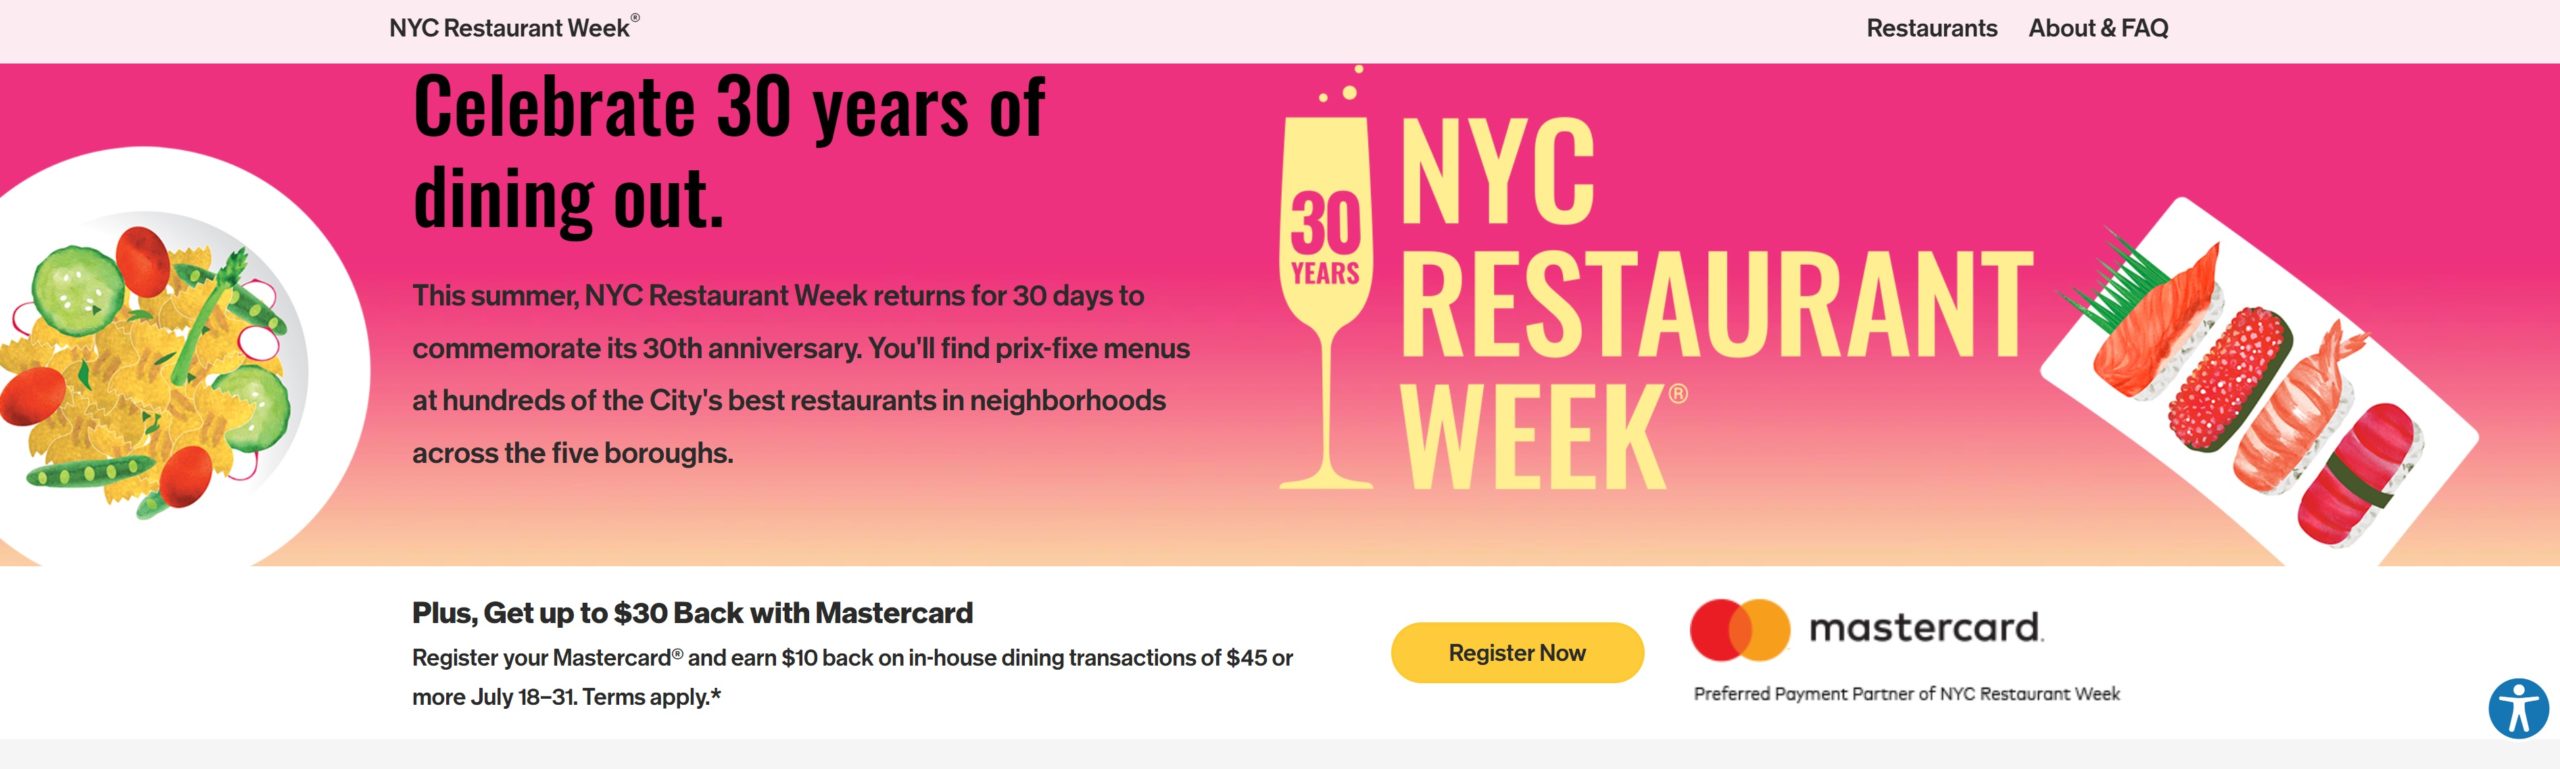 10 back on 45 on New York City restaurant week (up to 3x) with Mastercard